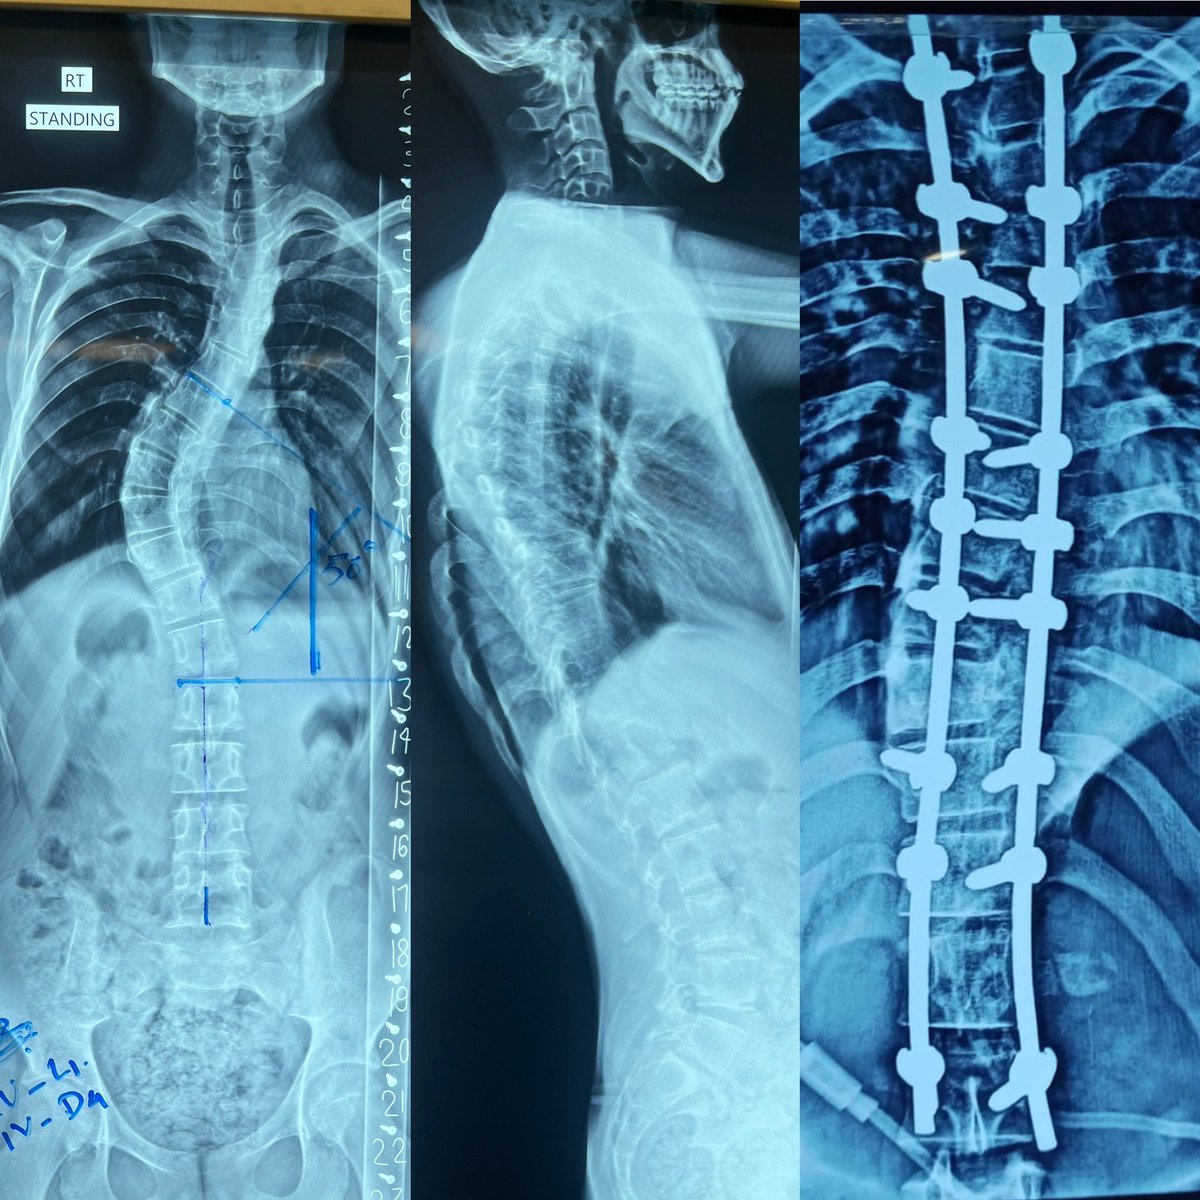 Segmental Spinal Instrumentation D2- L2  in a 14 years boy having adolescent Idiopathic scoliosis (AIS). #Orthotwitter #Medtwitter #spine